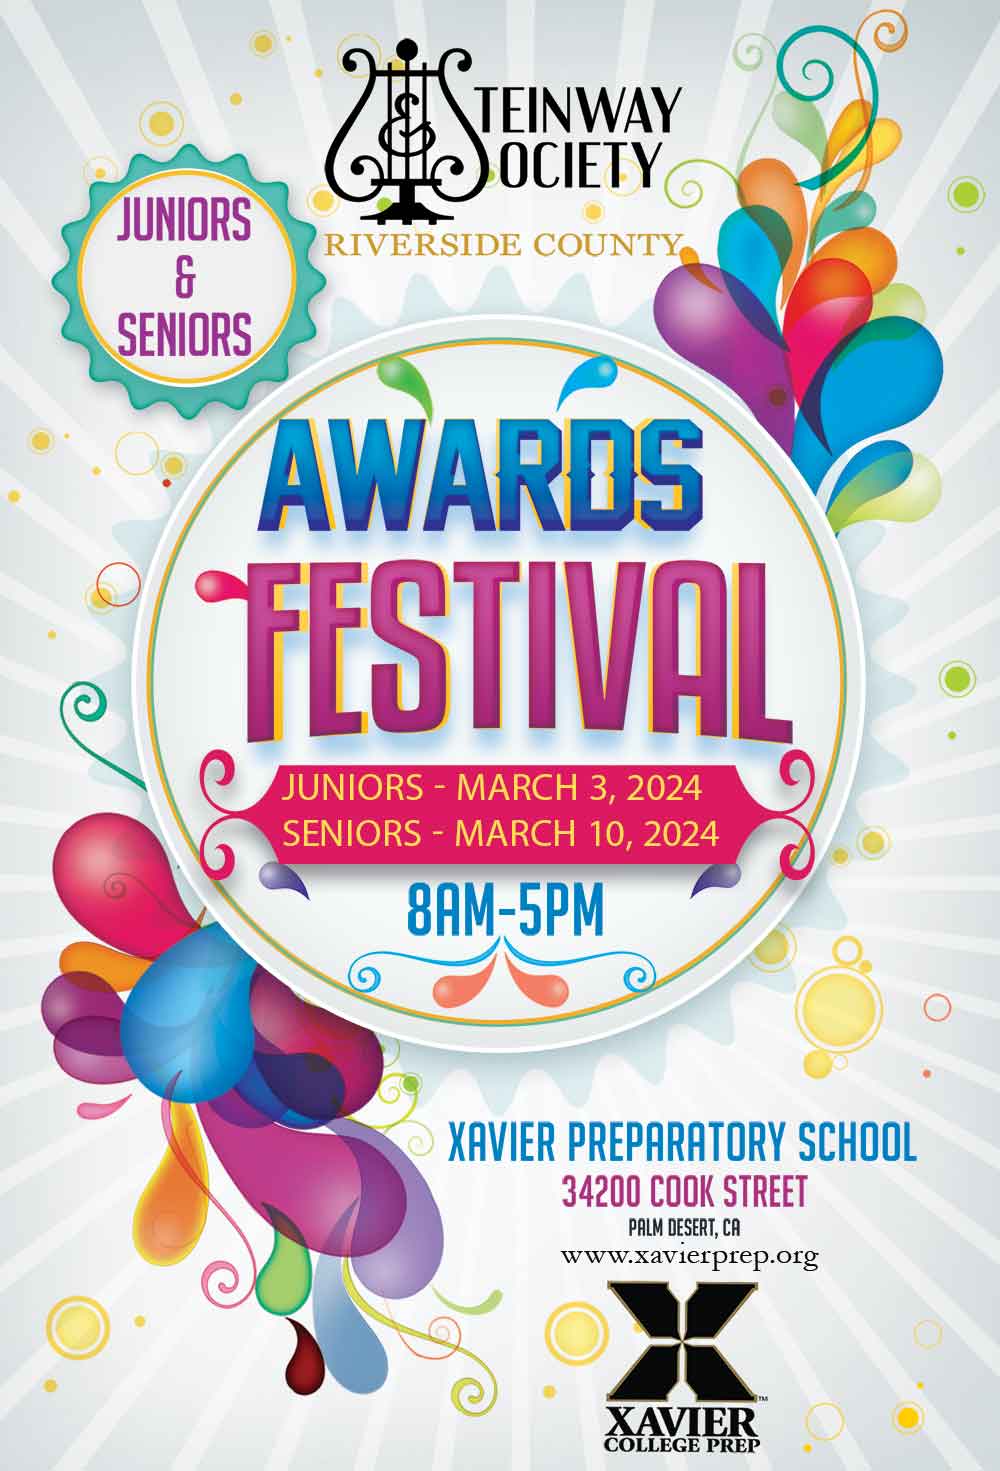 Information flyer for the Steinway Awards Festival